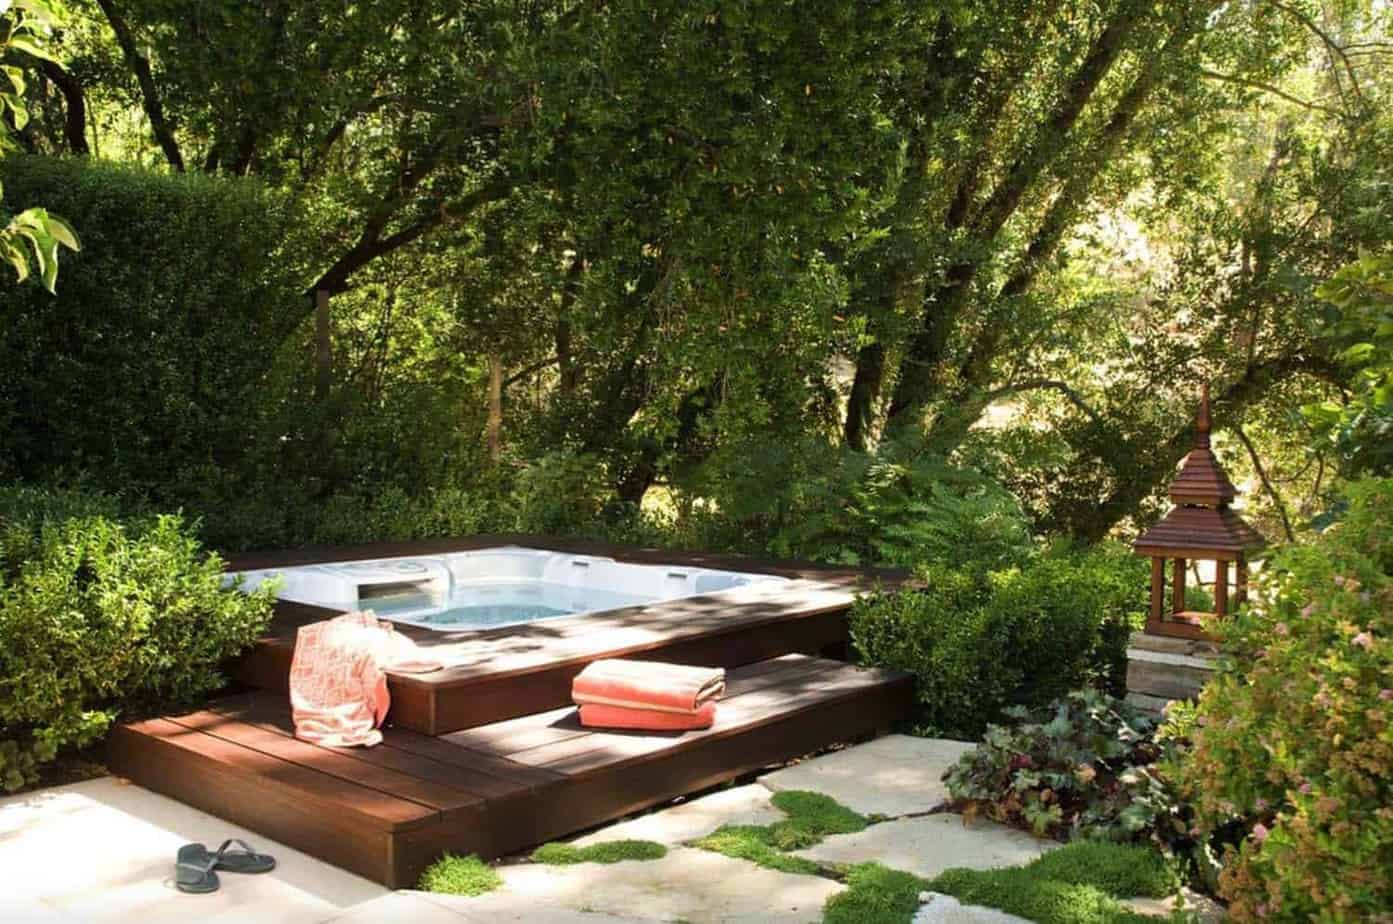 Hot tub deck combined with a landscape, adding natural privacy barrier